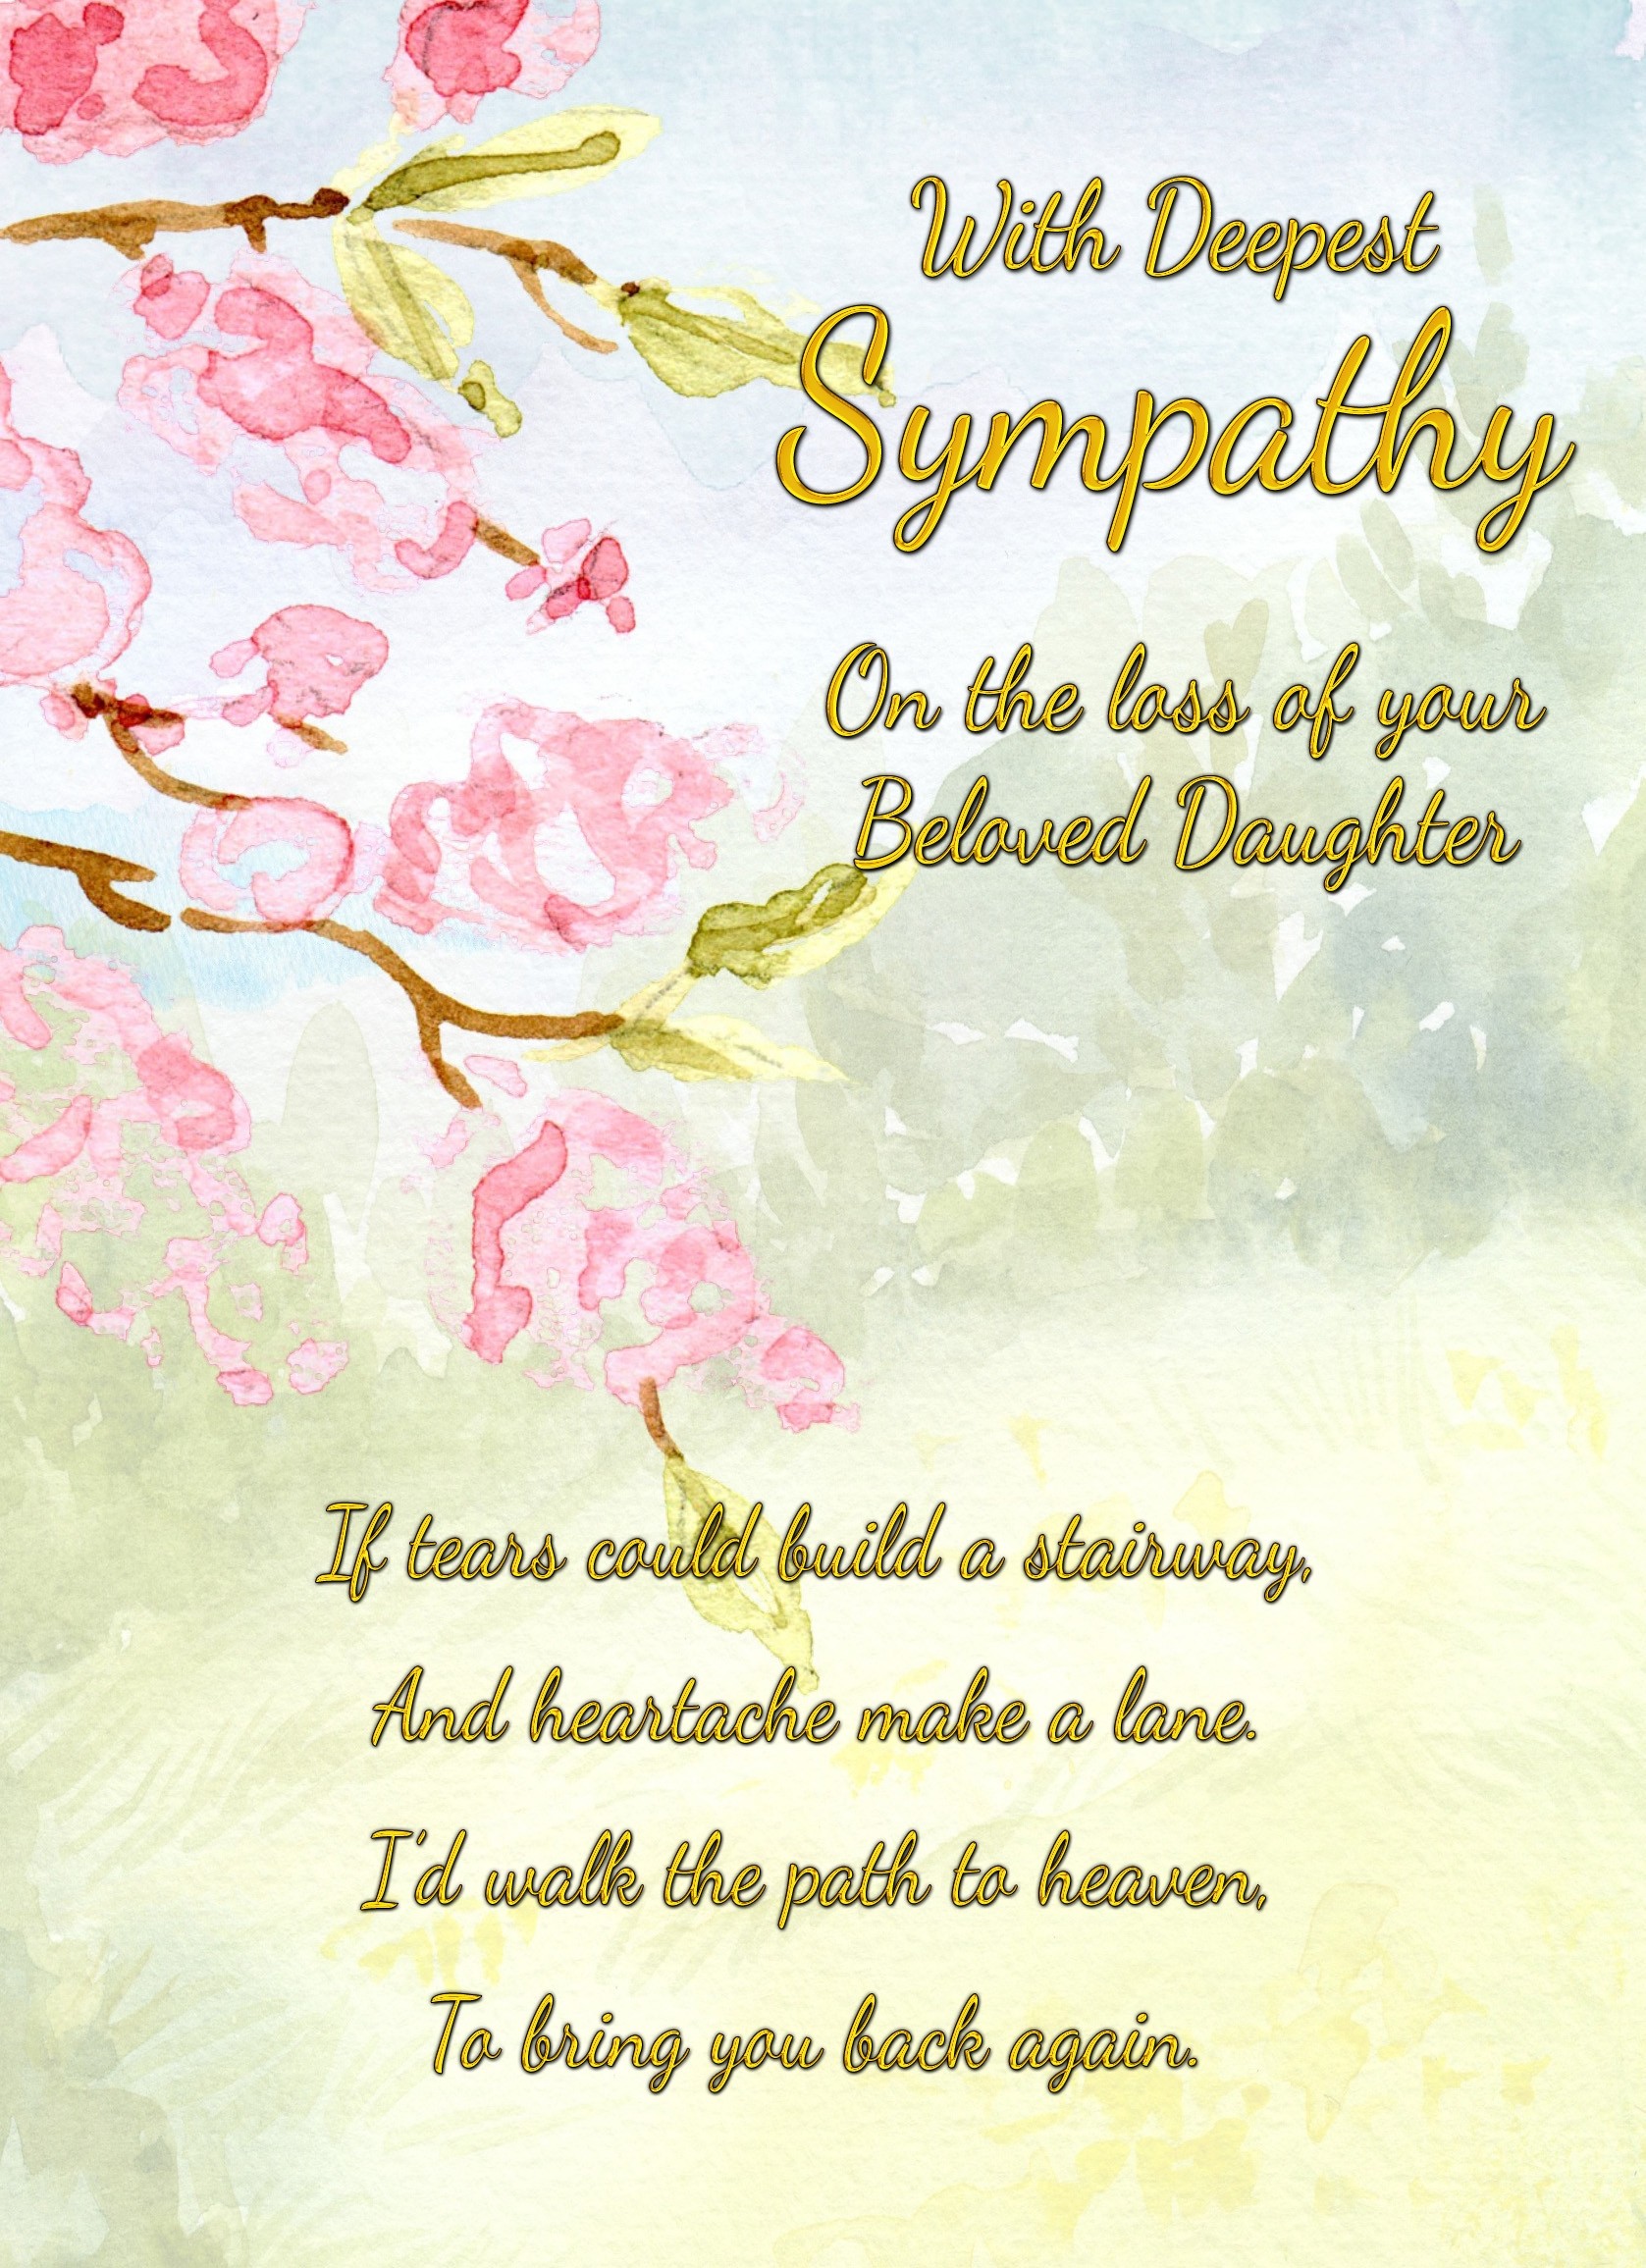 Sympathy Bereavement Card (With Deepest Sympathy, Beloved Daughter)